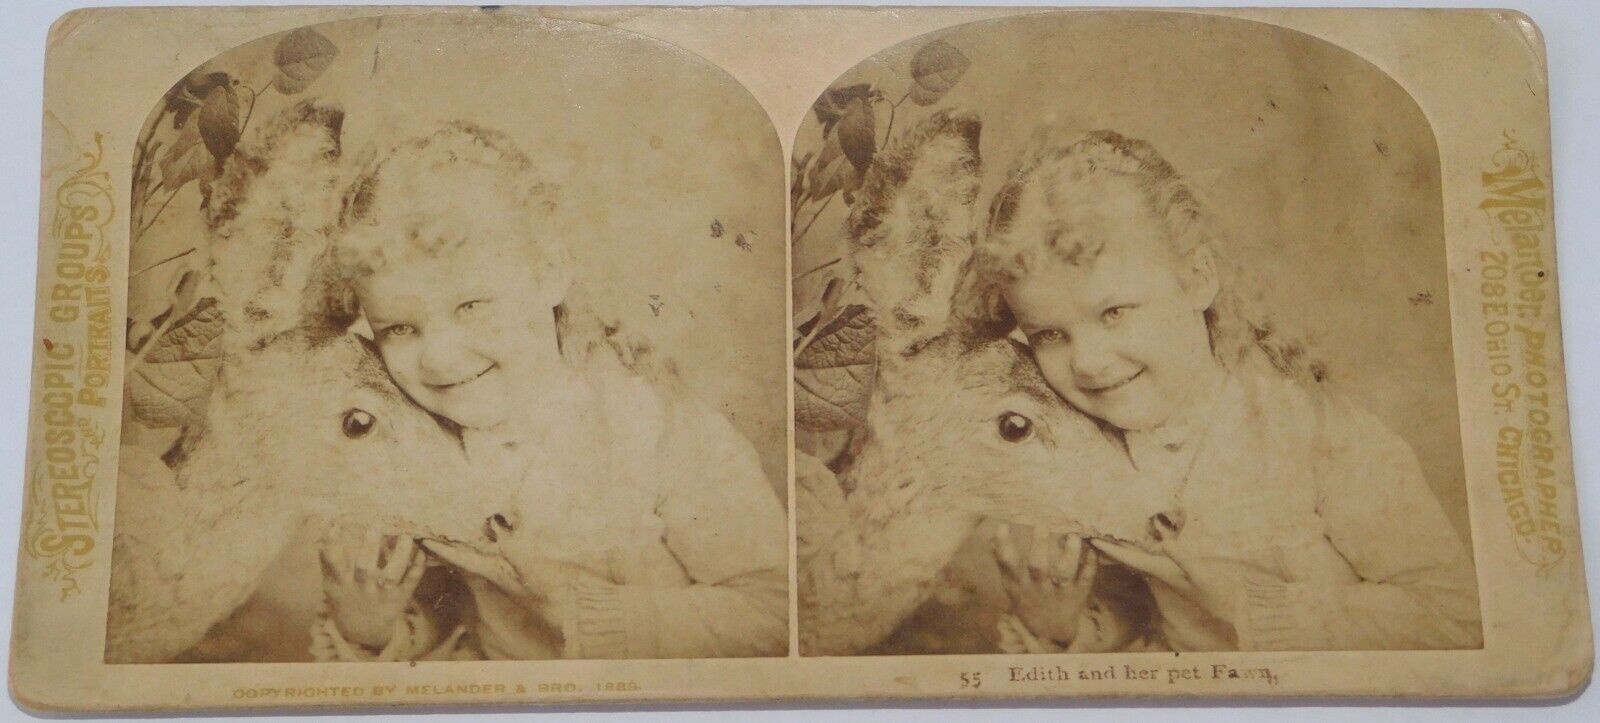 ATQ 1880's Child Little Girl & Pet Deer Fawn Chicago Portrait STEROVIEW PHOTO